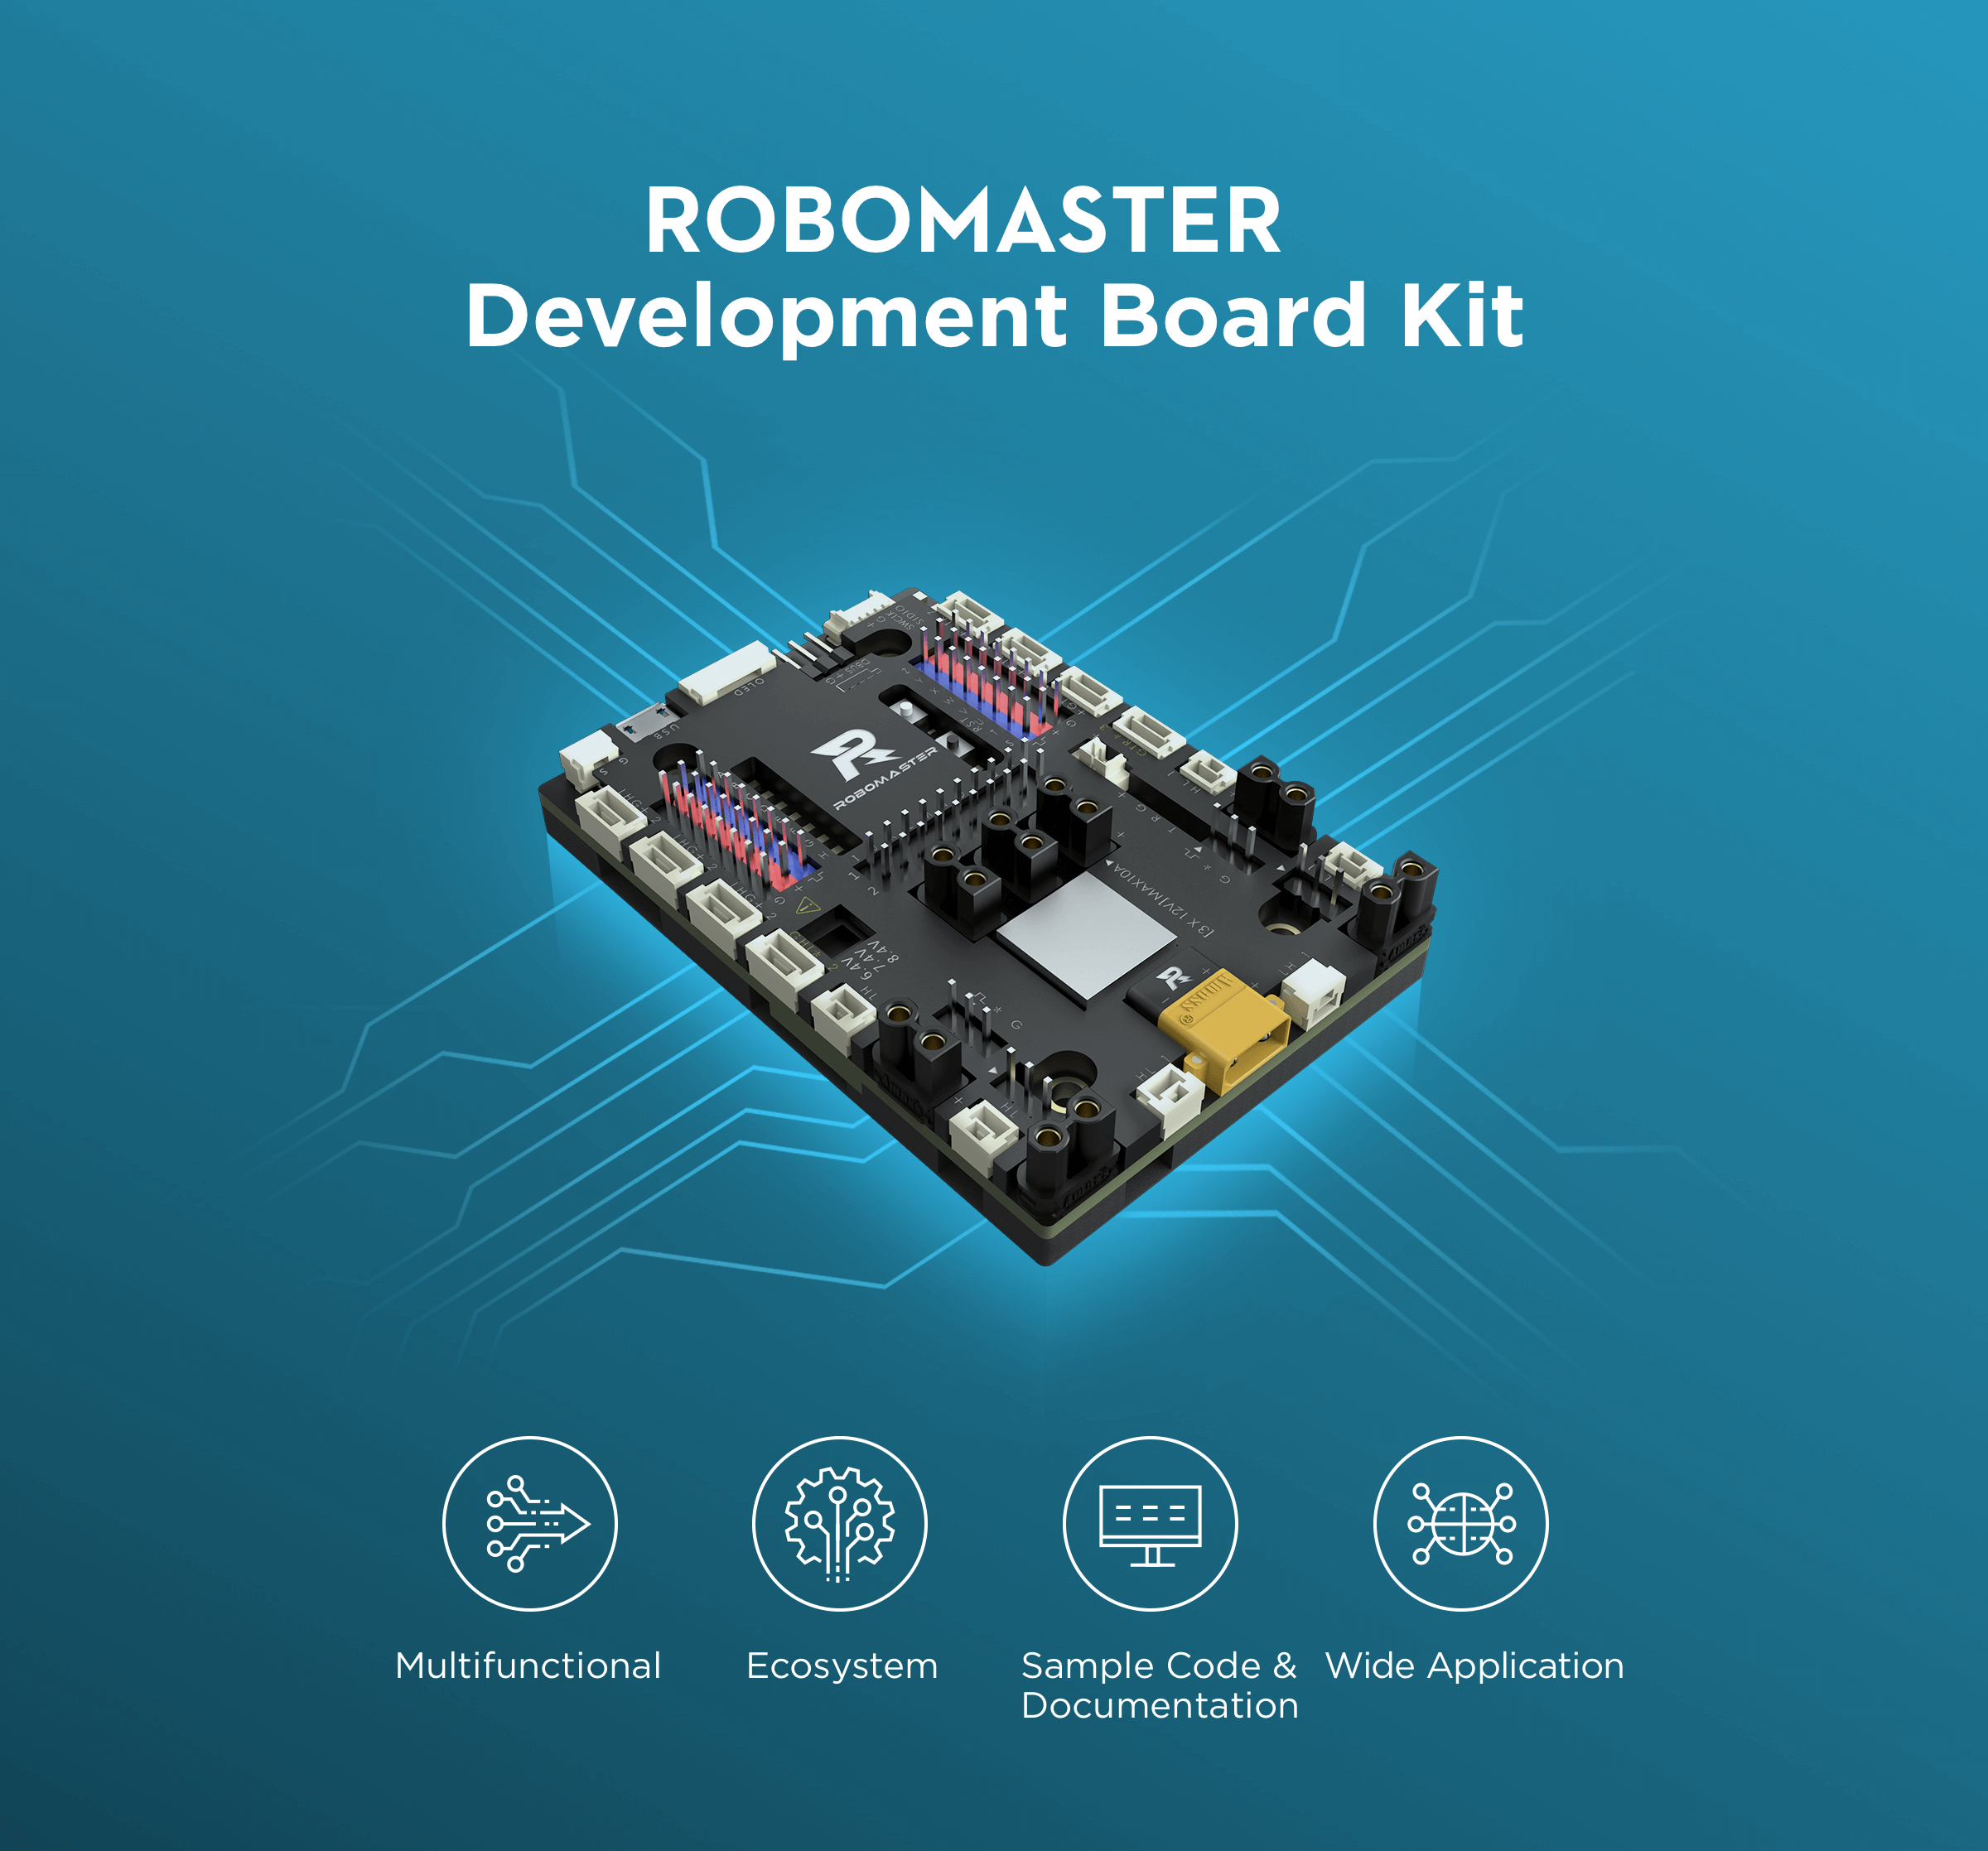 Product Picture of Development Board